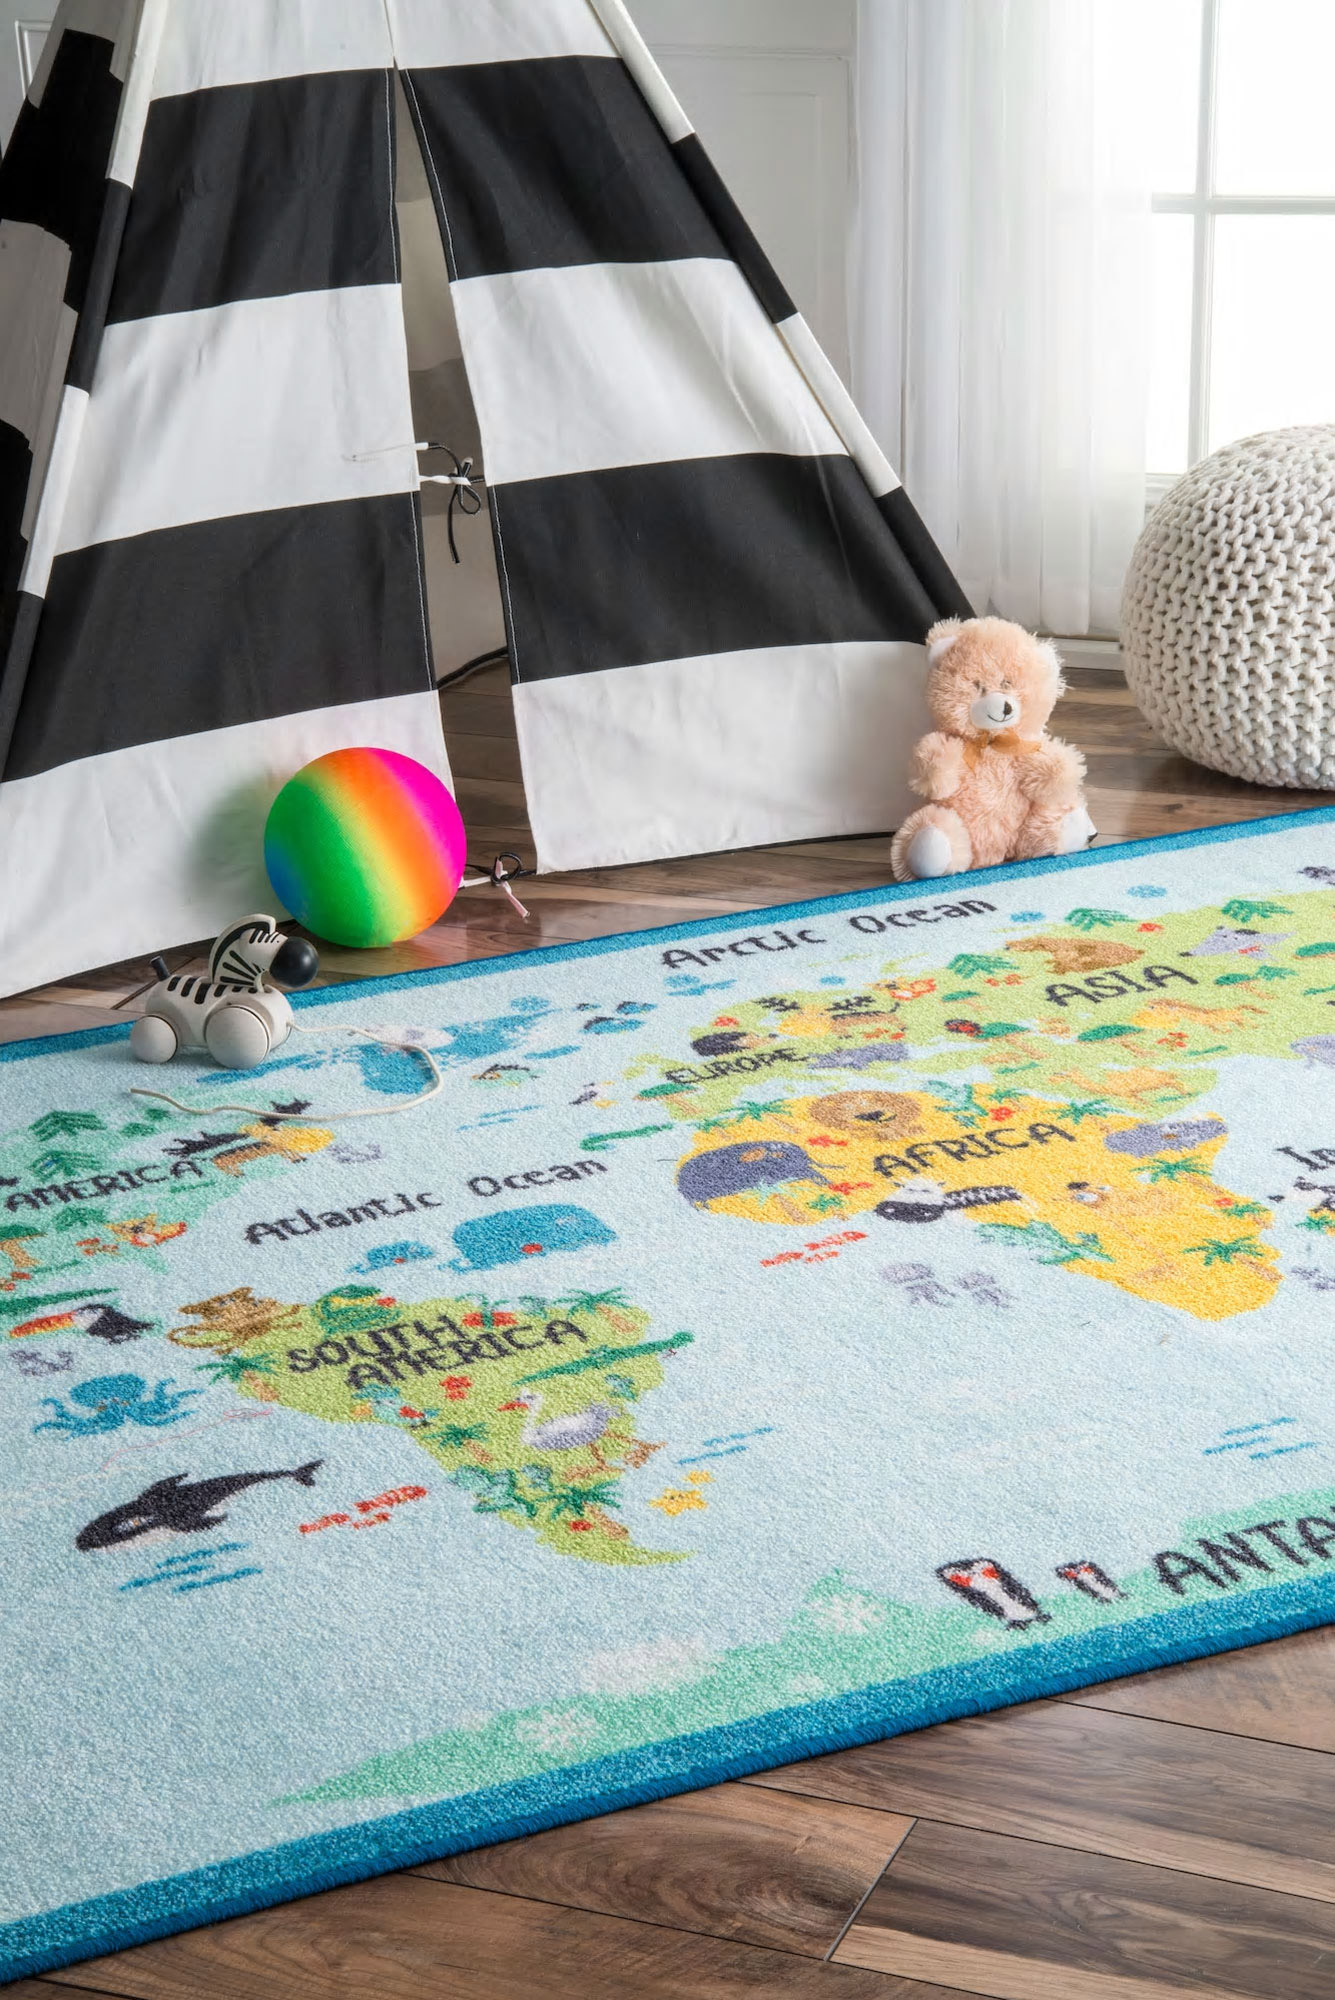 Kids World Map Rug Blue Rugs 30 Day, World Of Rugs